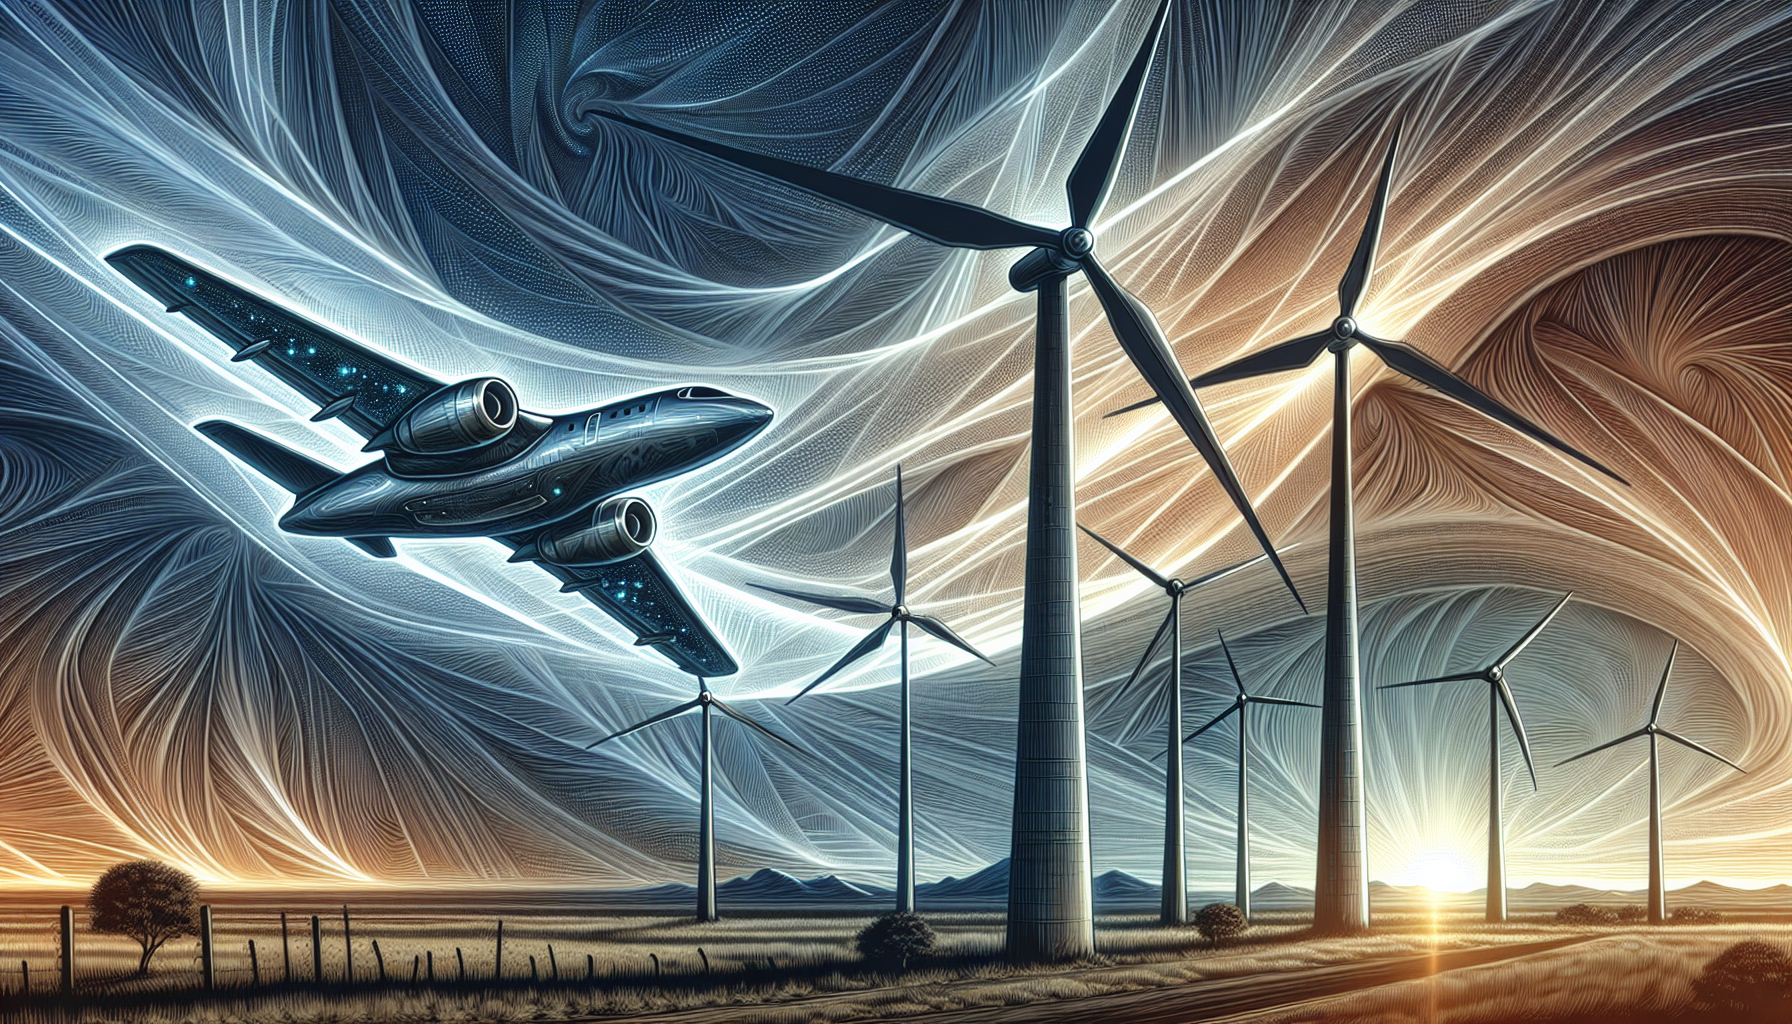 Illustration of aerospace and wind power convergence